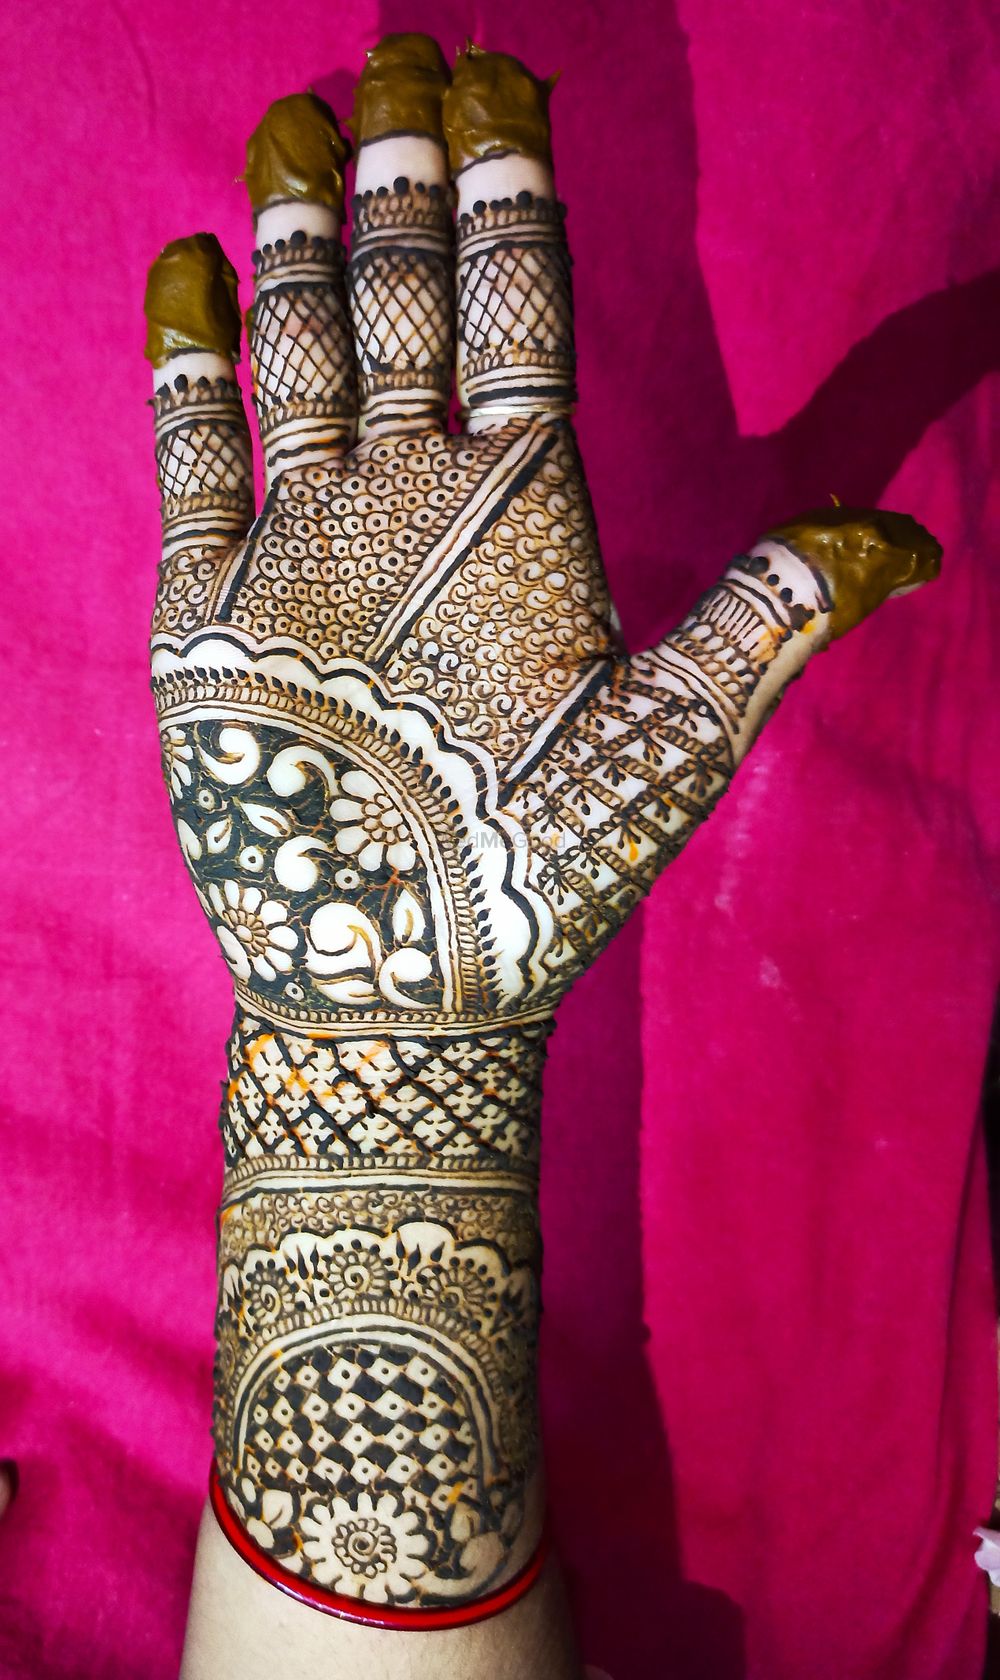 Photo From Bridal Full Hand - By Henna by Somi